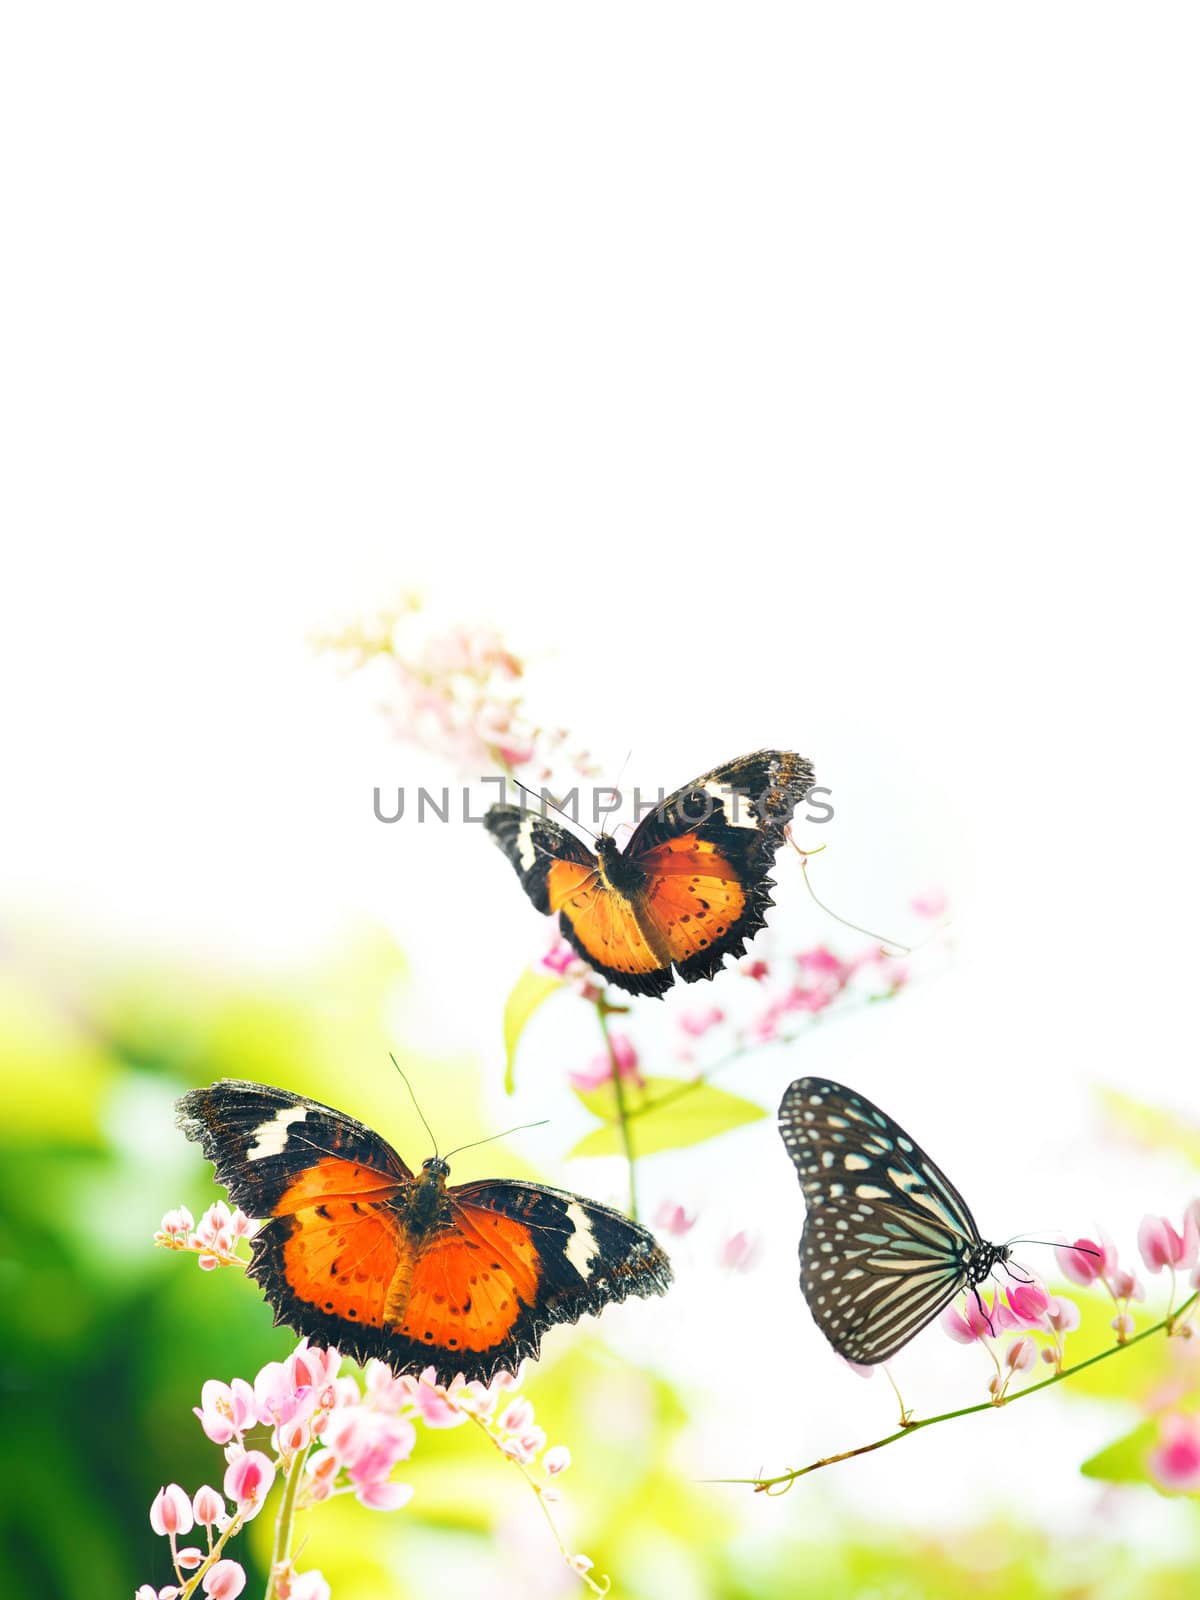 Butterflies on flowers, flora and fauna, with blank copy space on top.